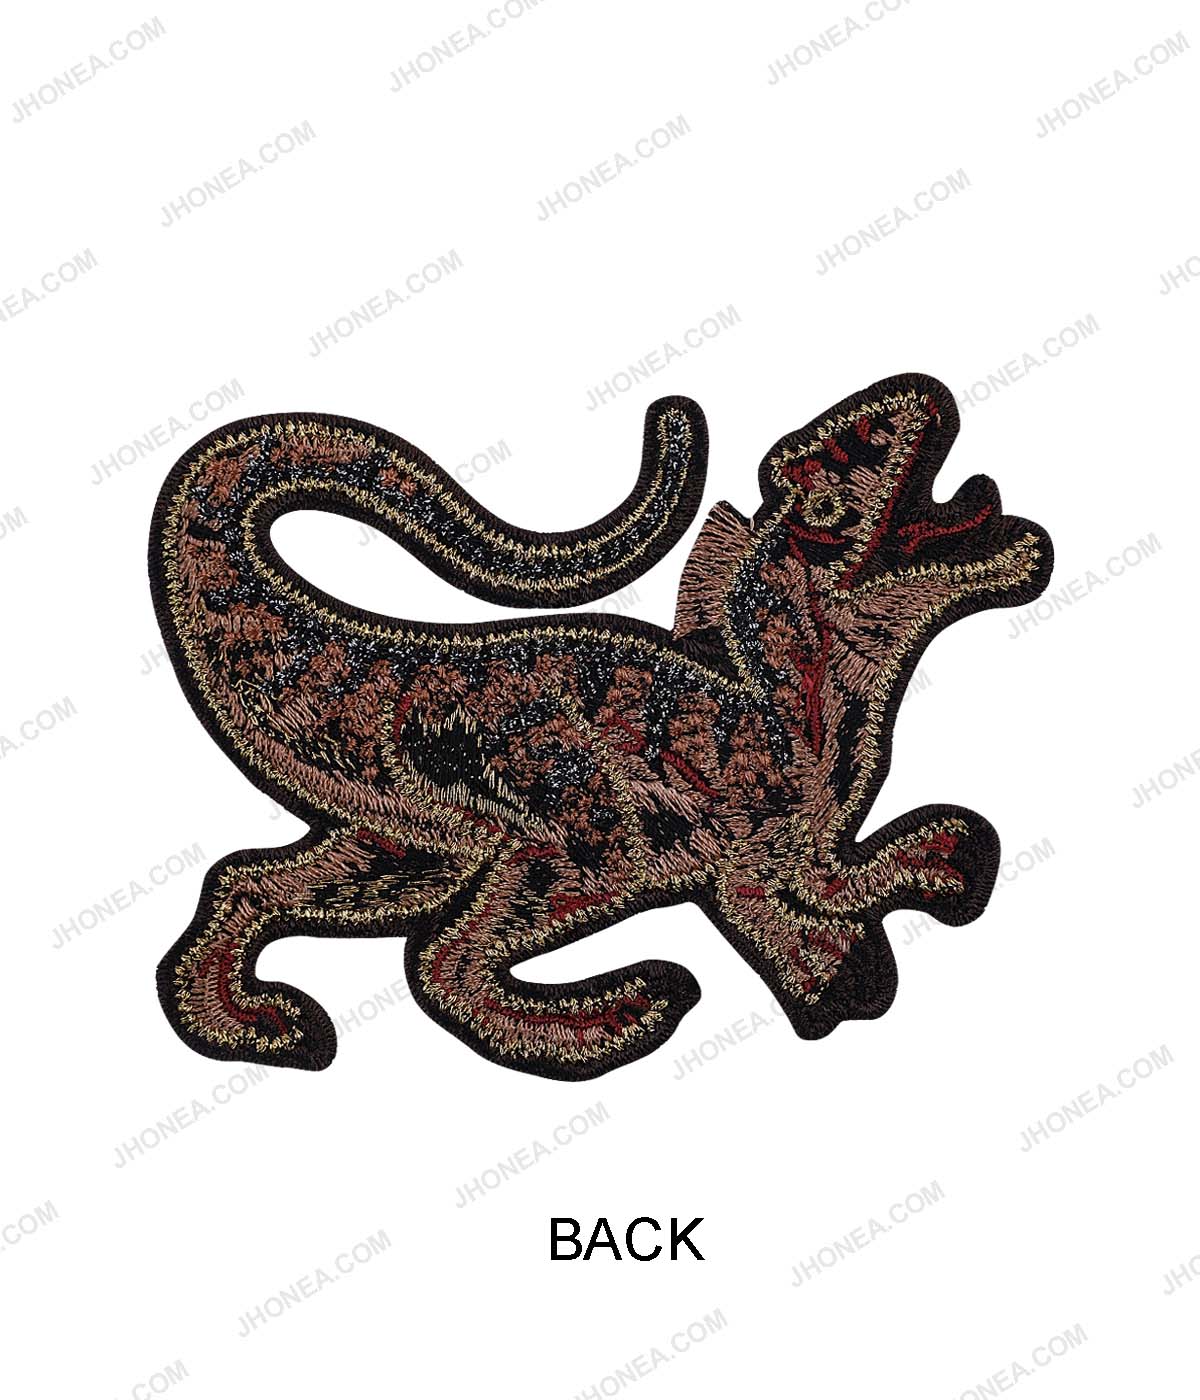 Beautiful Intricately Embroidered Multicolor Lizard Patch